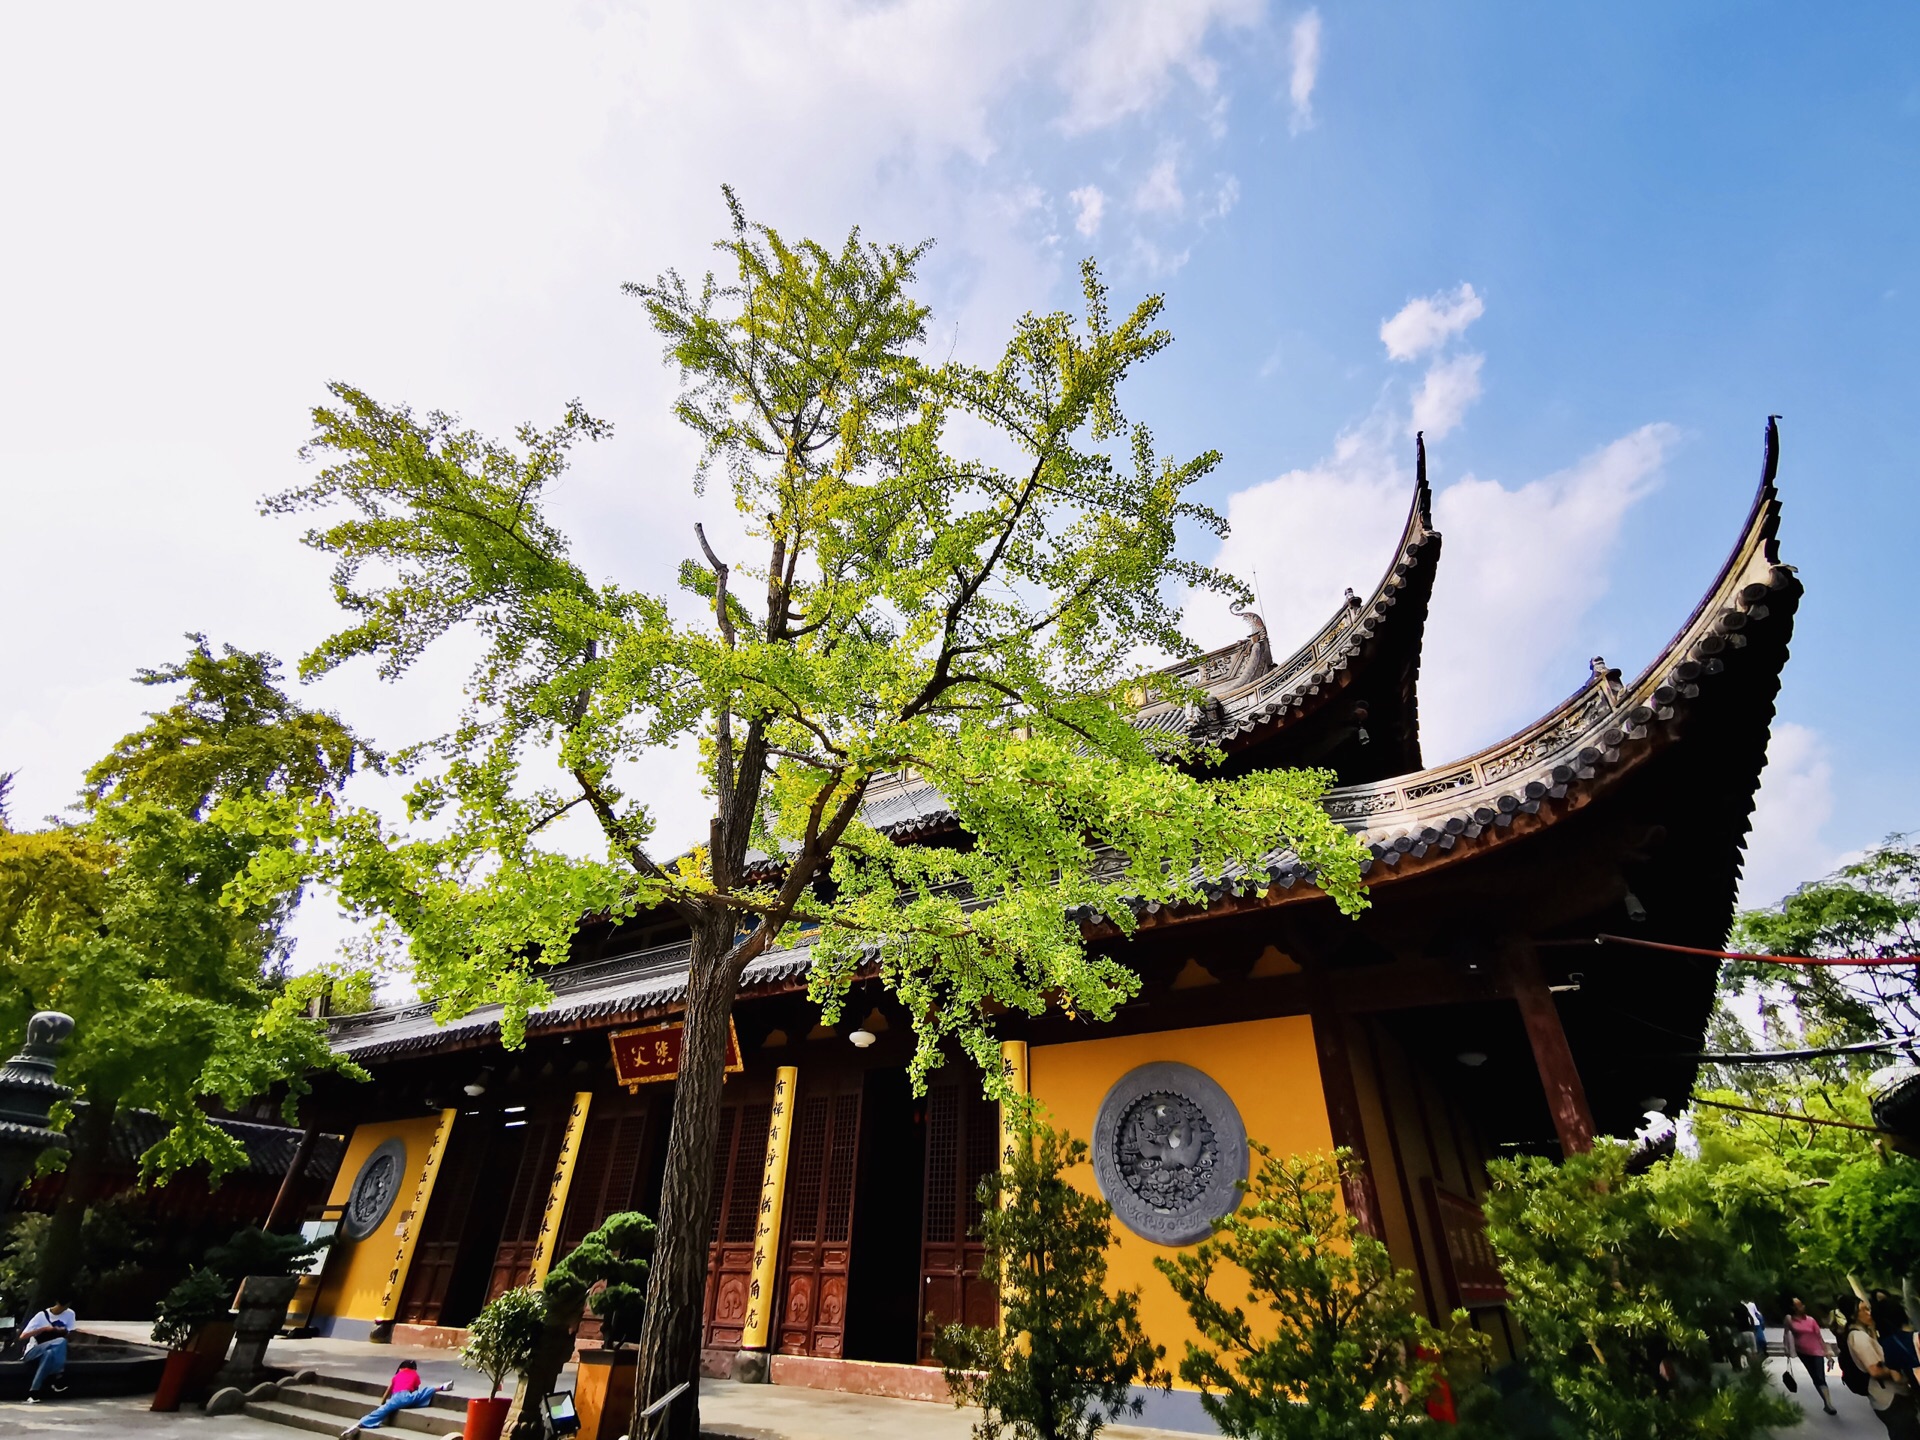 Main Tower Of Longhua Ancient Temple In Shanghai Picture And HD Photos ...